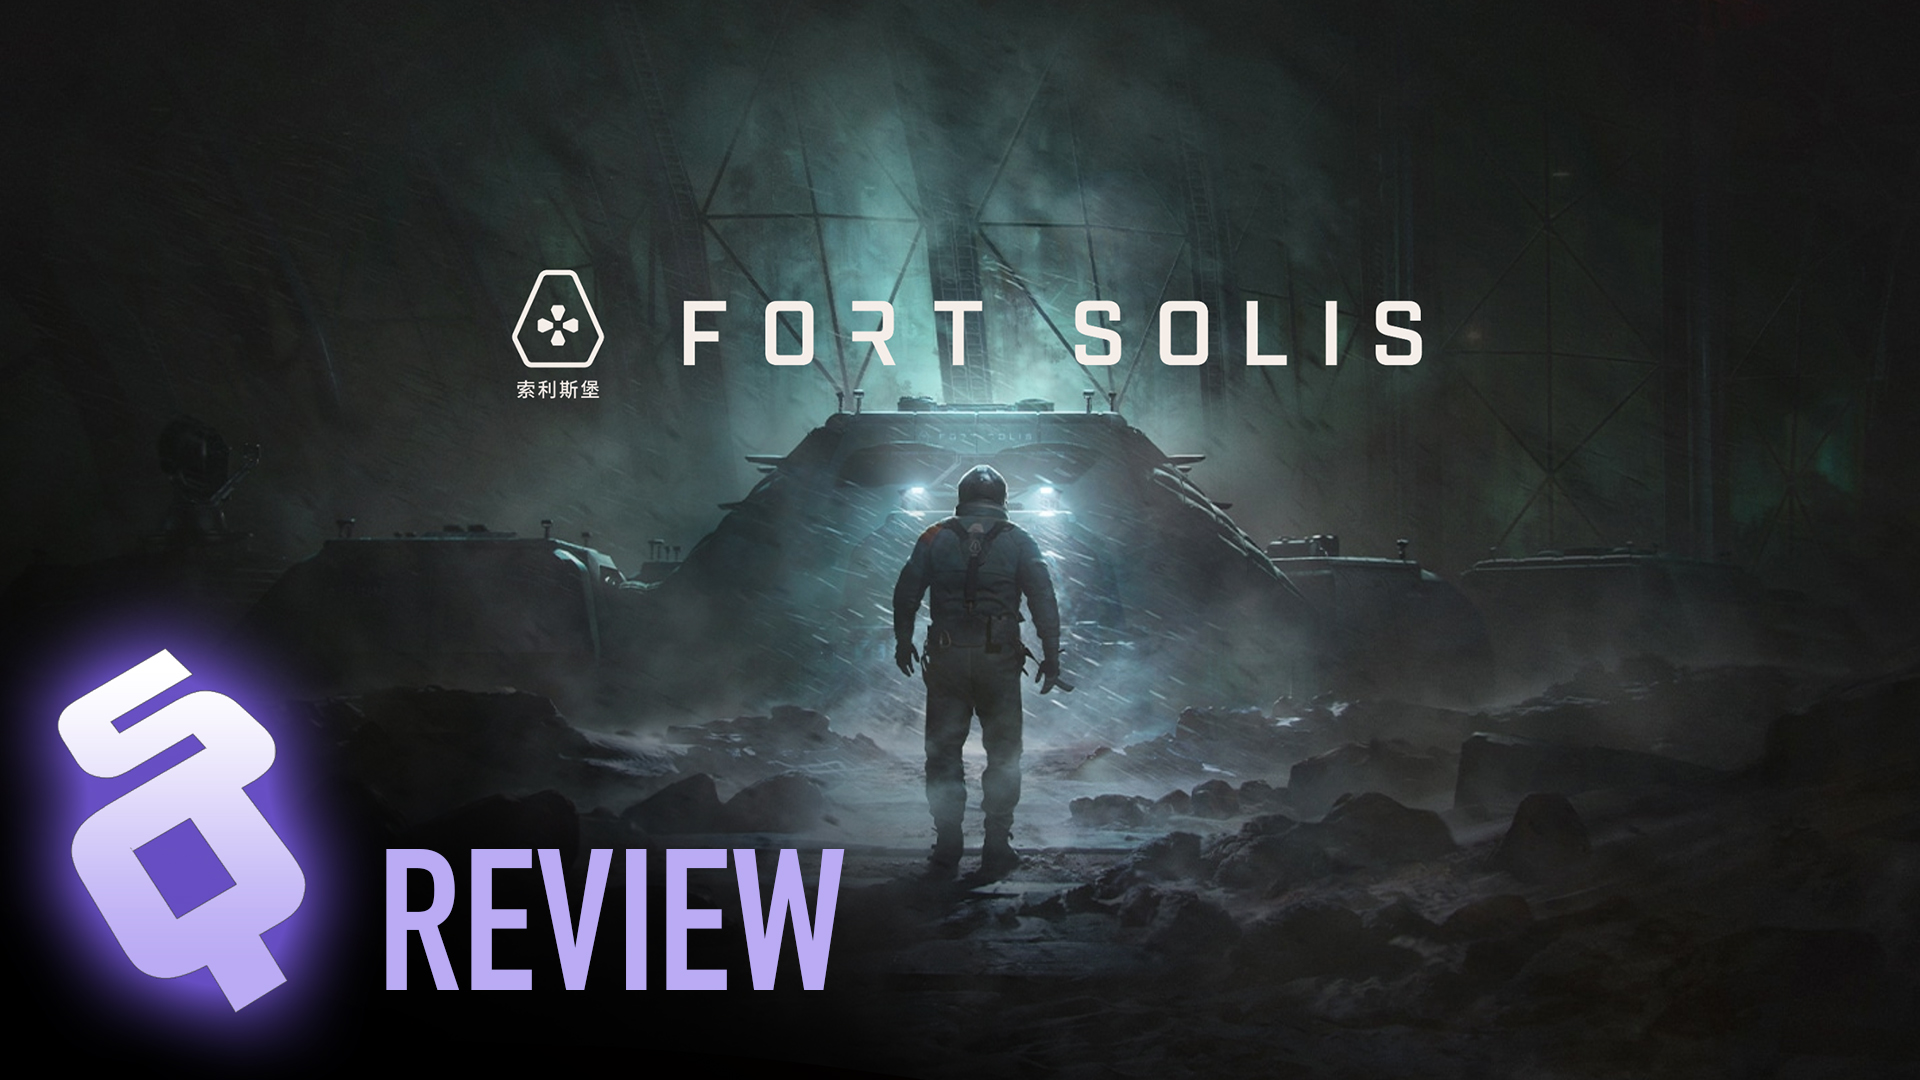 Fort Solis review